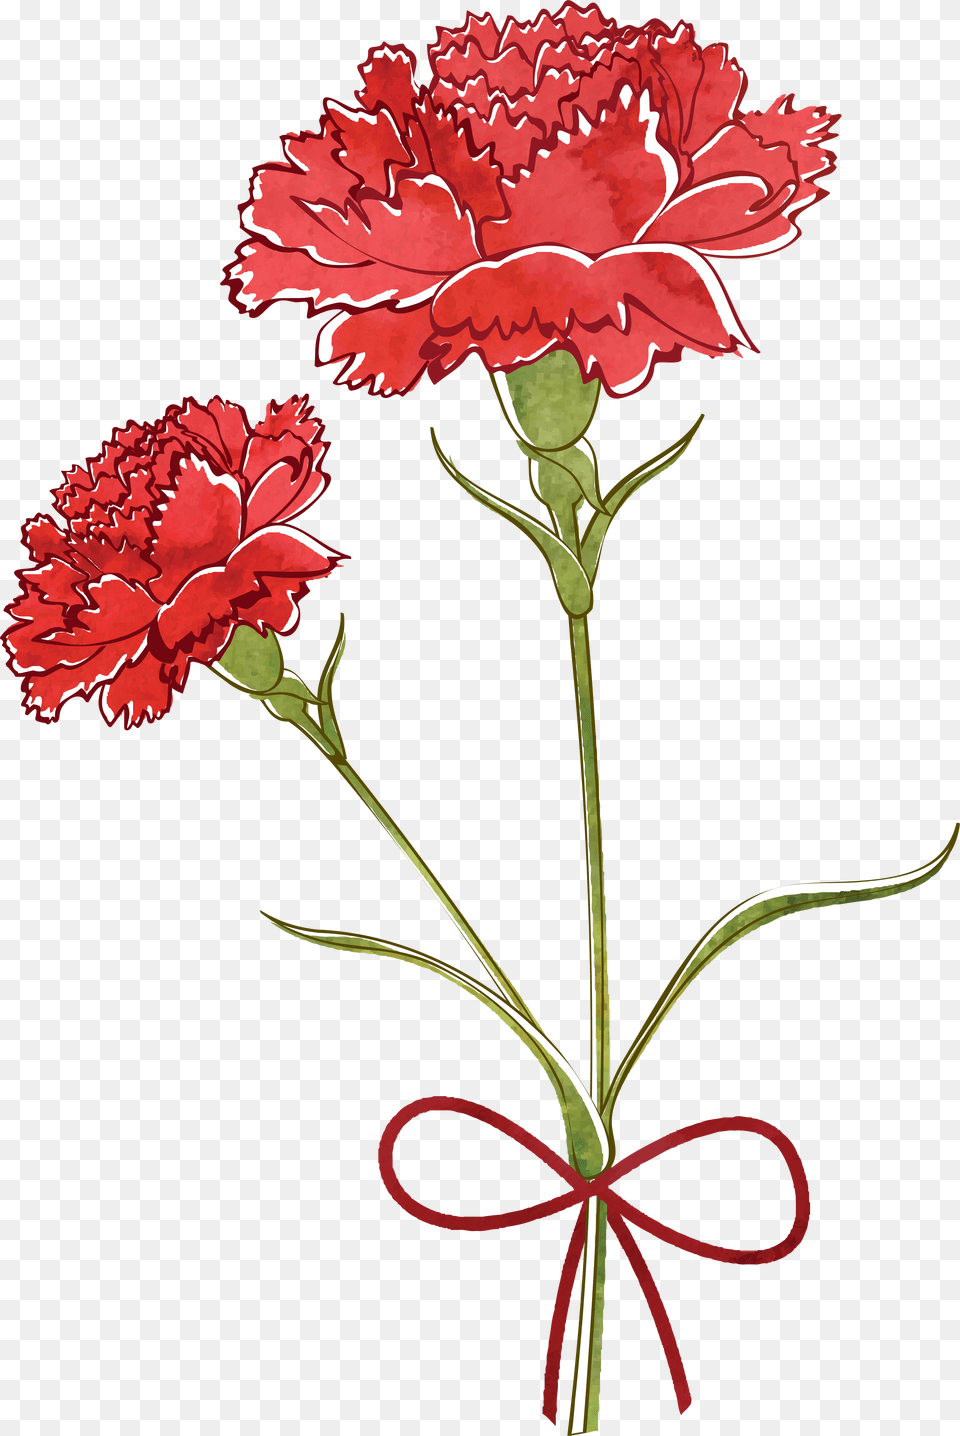 Flower Watercolor Painting Transprent Free Download Carnation Vector Free, Plant, Rose Png